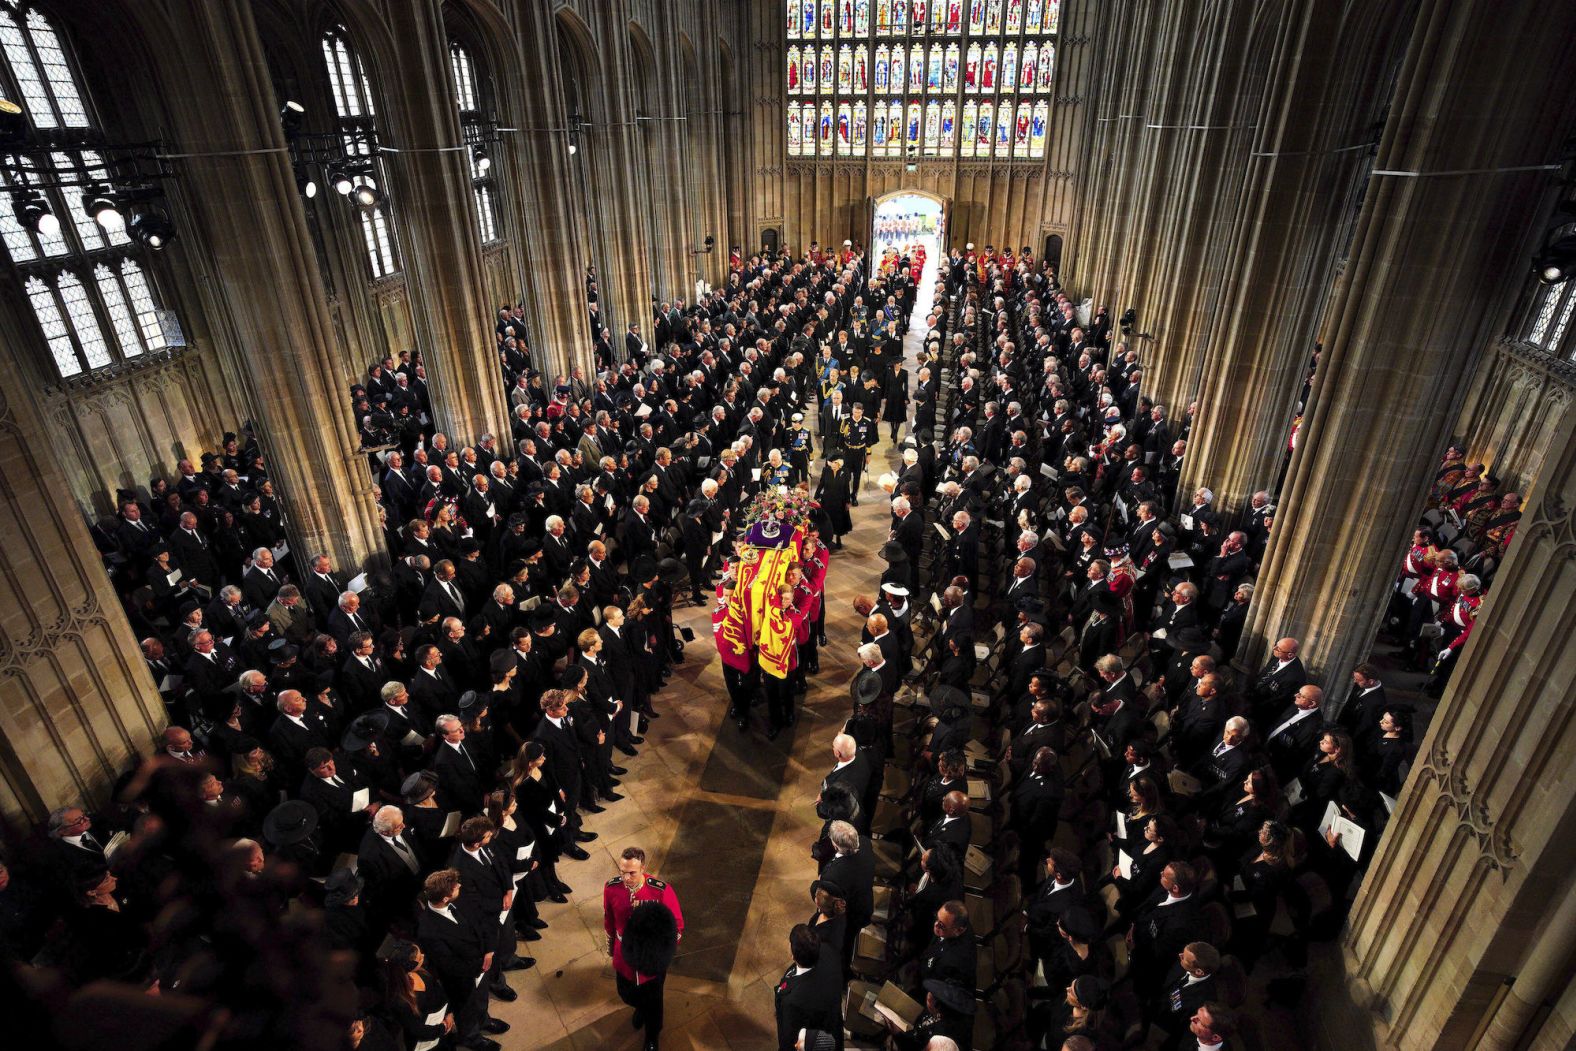 Members of the royal family follow the coffin into St. George's Chapel.